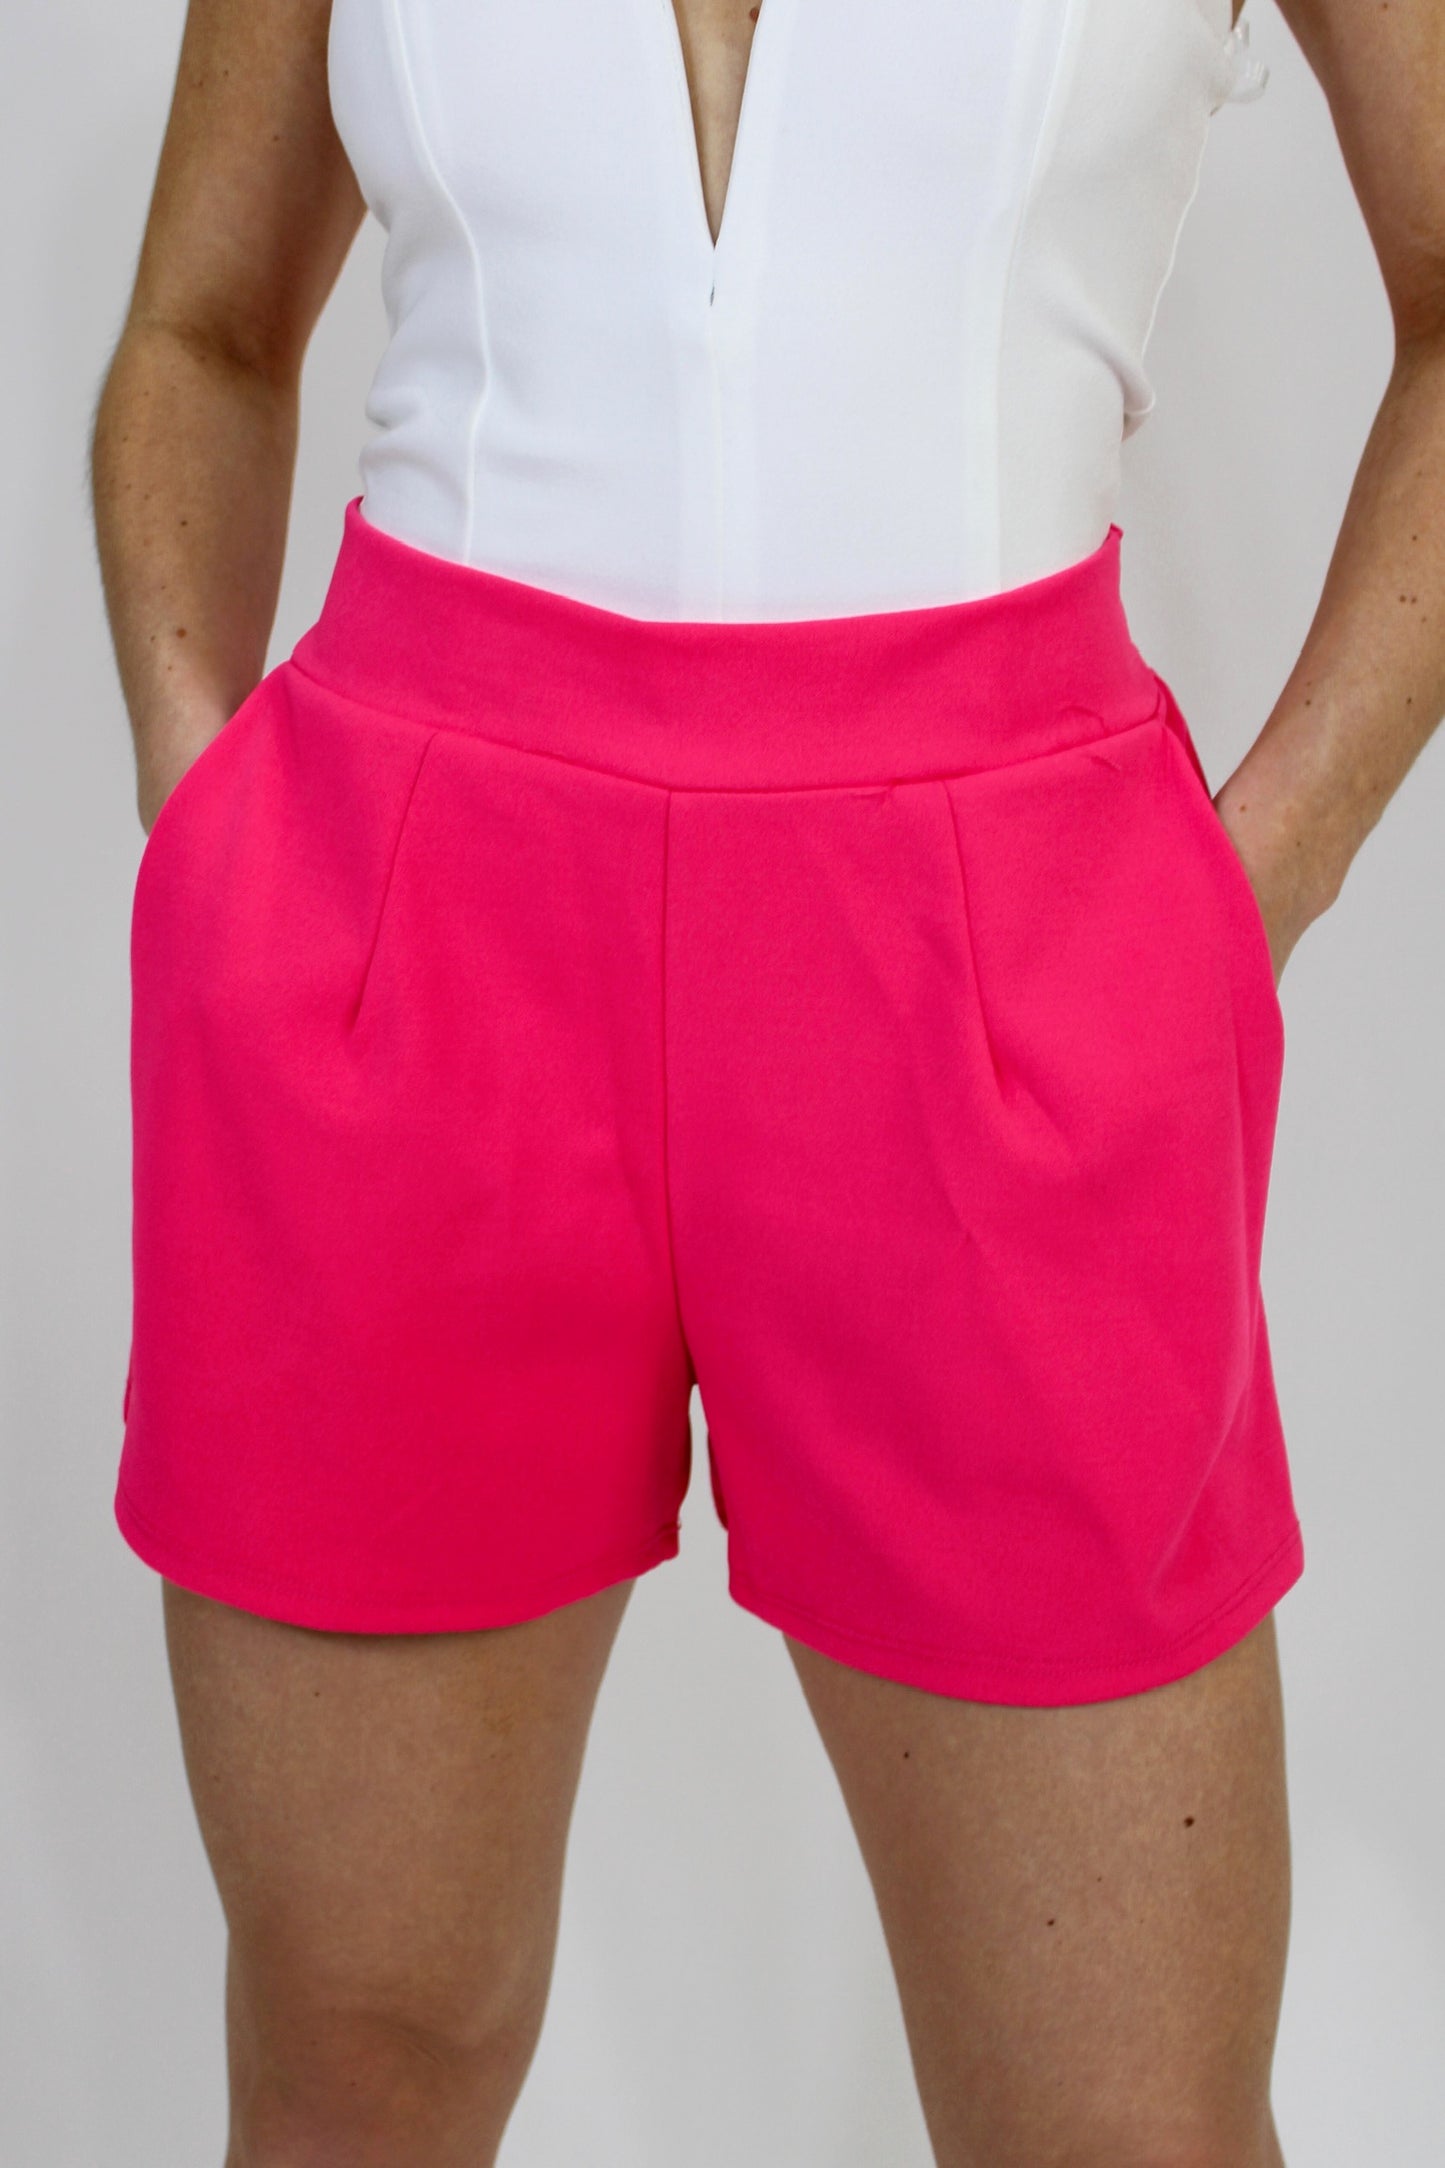 Solid Hot Pink Shorts with Pleated Design